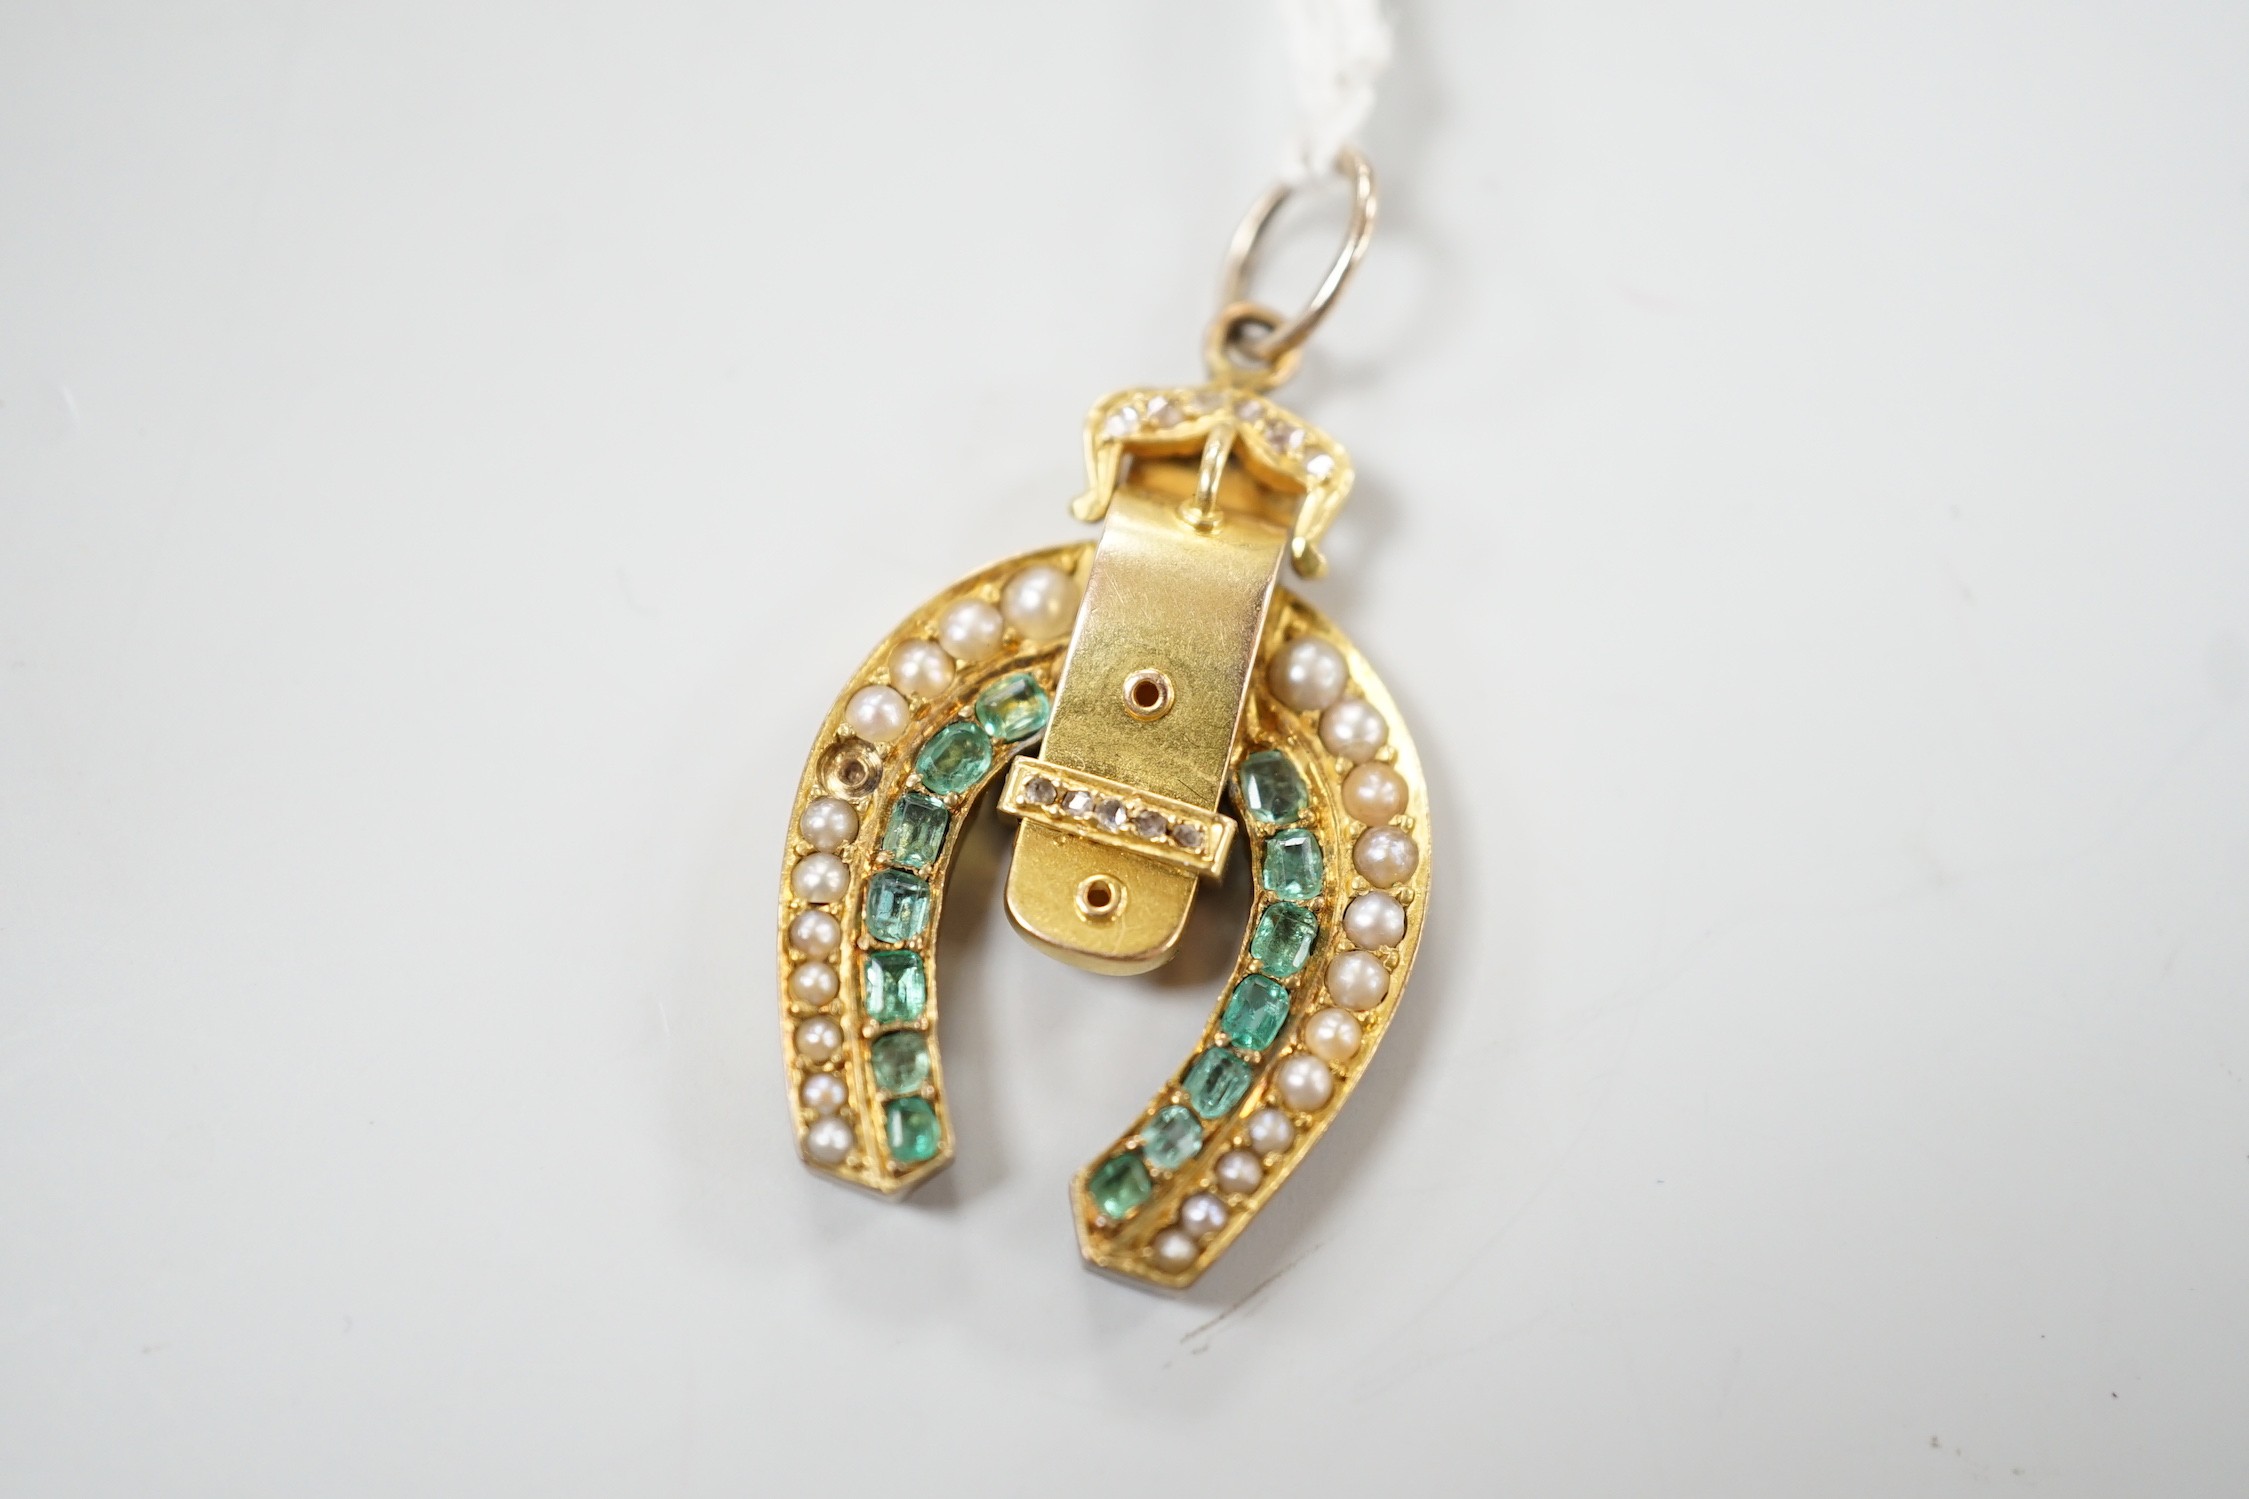 An early 20th century yellow metal, emerald, rose cut diamond and split pearl set horseshoe and buckle pendant, 33mm, gross weight 6 grams.